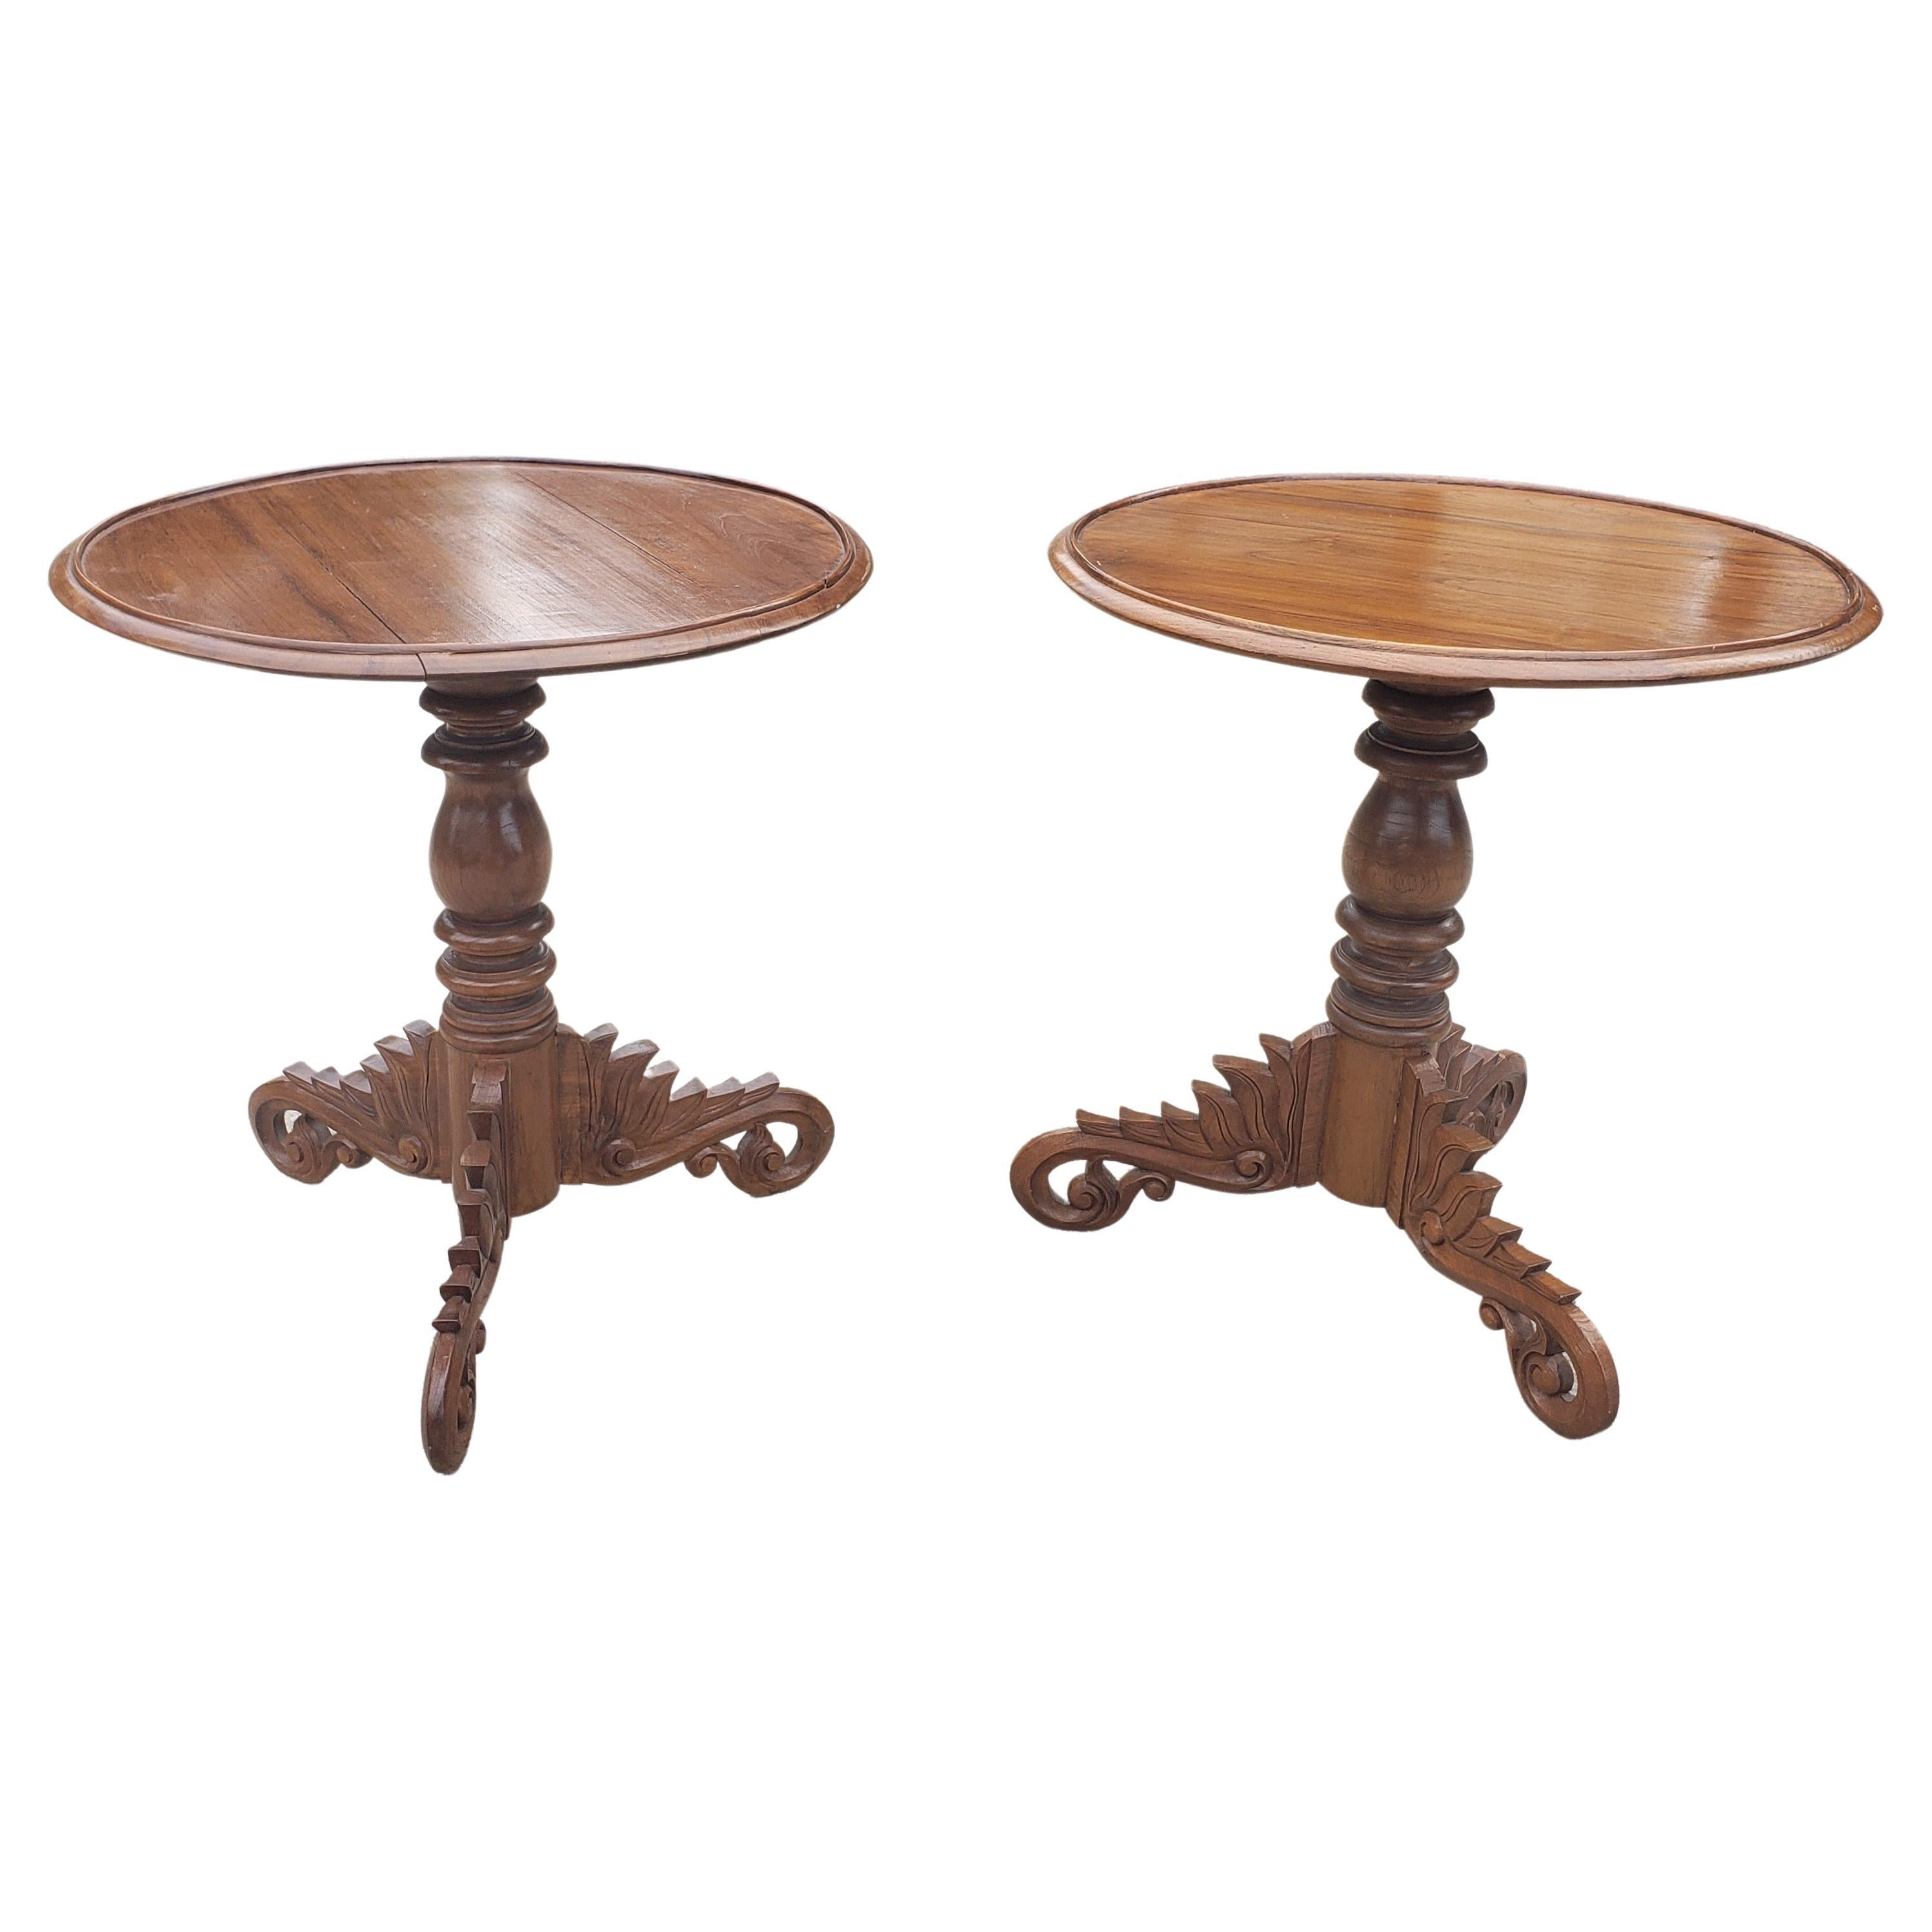 Fruitwood Vintage Pedestal Mahogany Tripod Gator Tail Feet Side Tables, a Pair For Sale